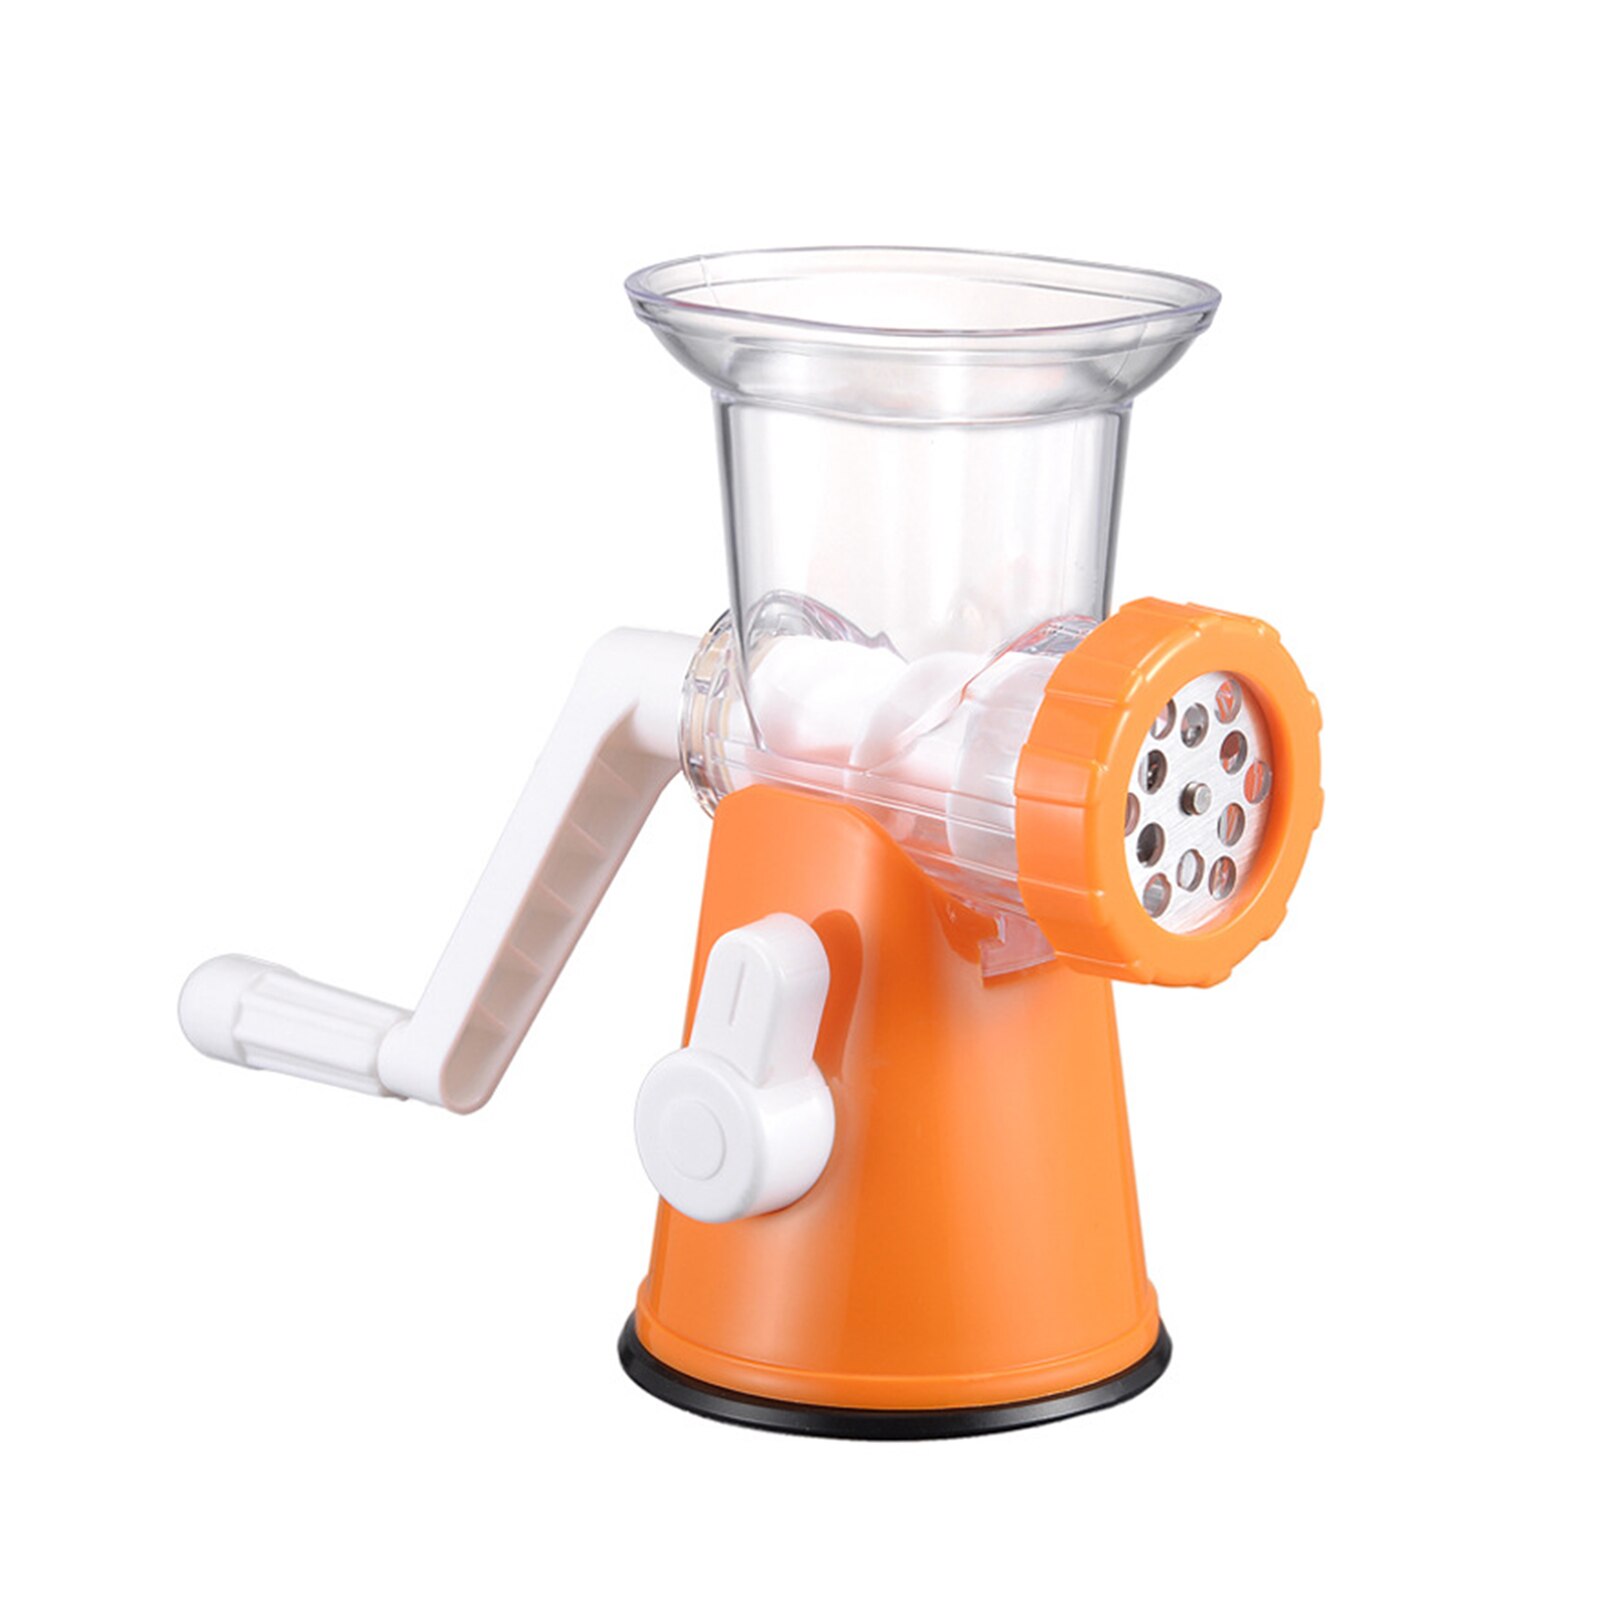 Kichen Meat Grinder Manual Food Grinder Hand Meat Mincer Grinding Machine with Suction Base Sausage Stuffing Tube Grinding Plate